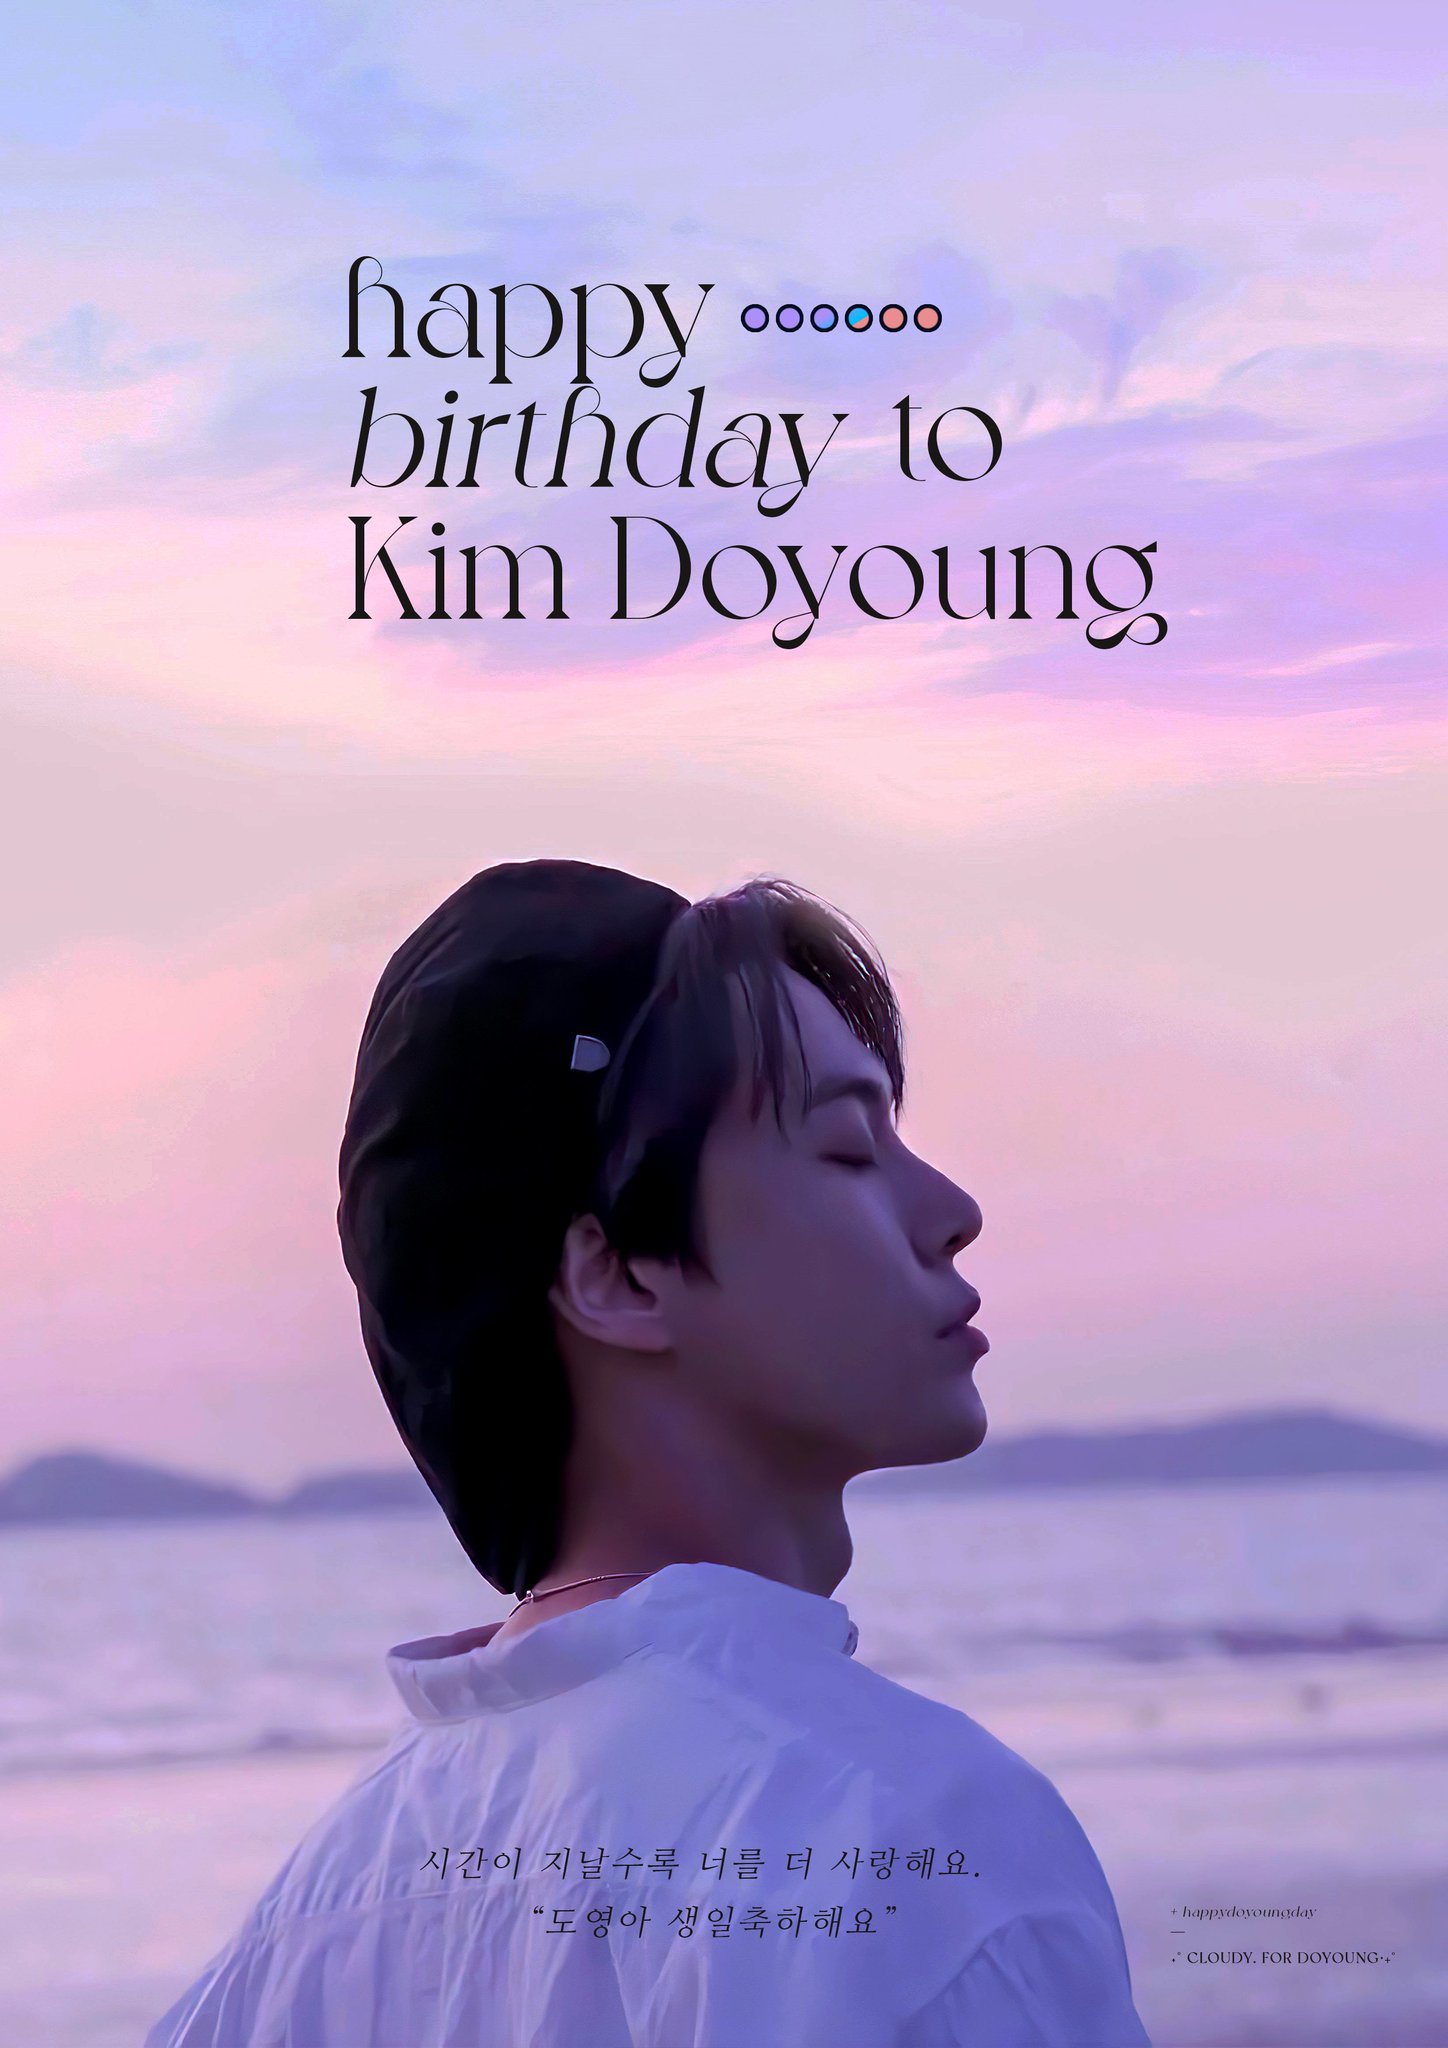 Doyoung nct birthday